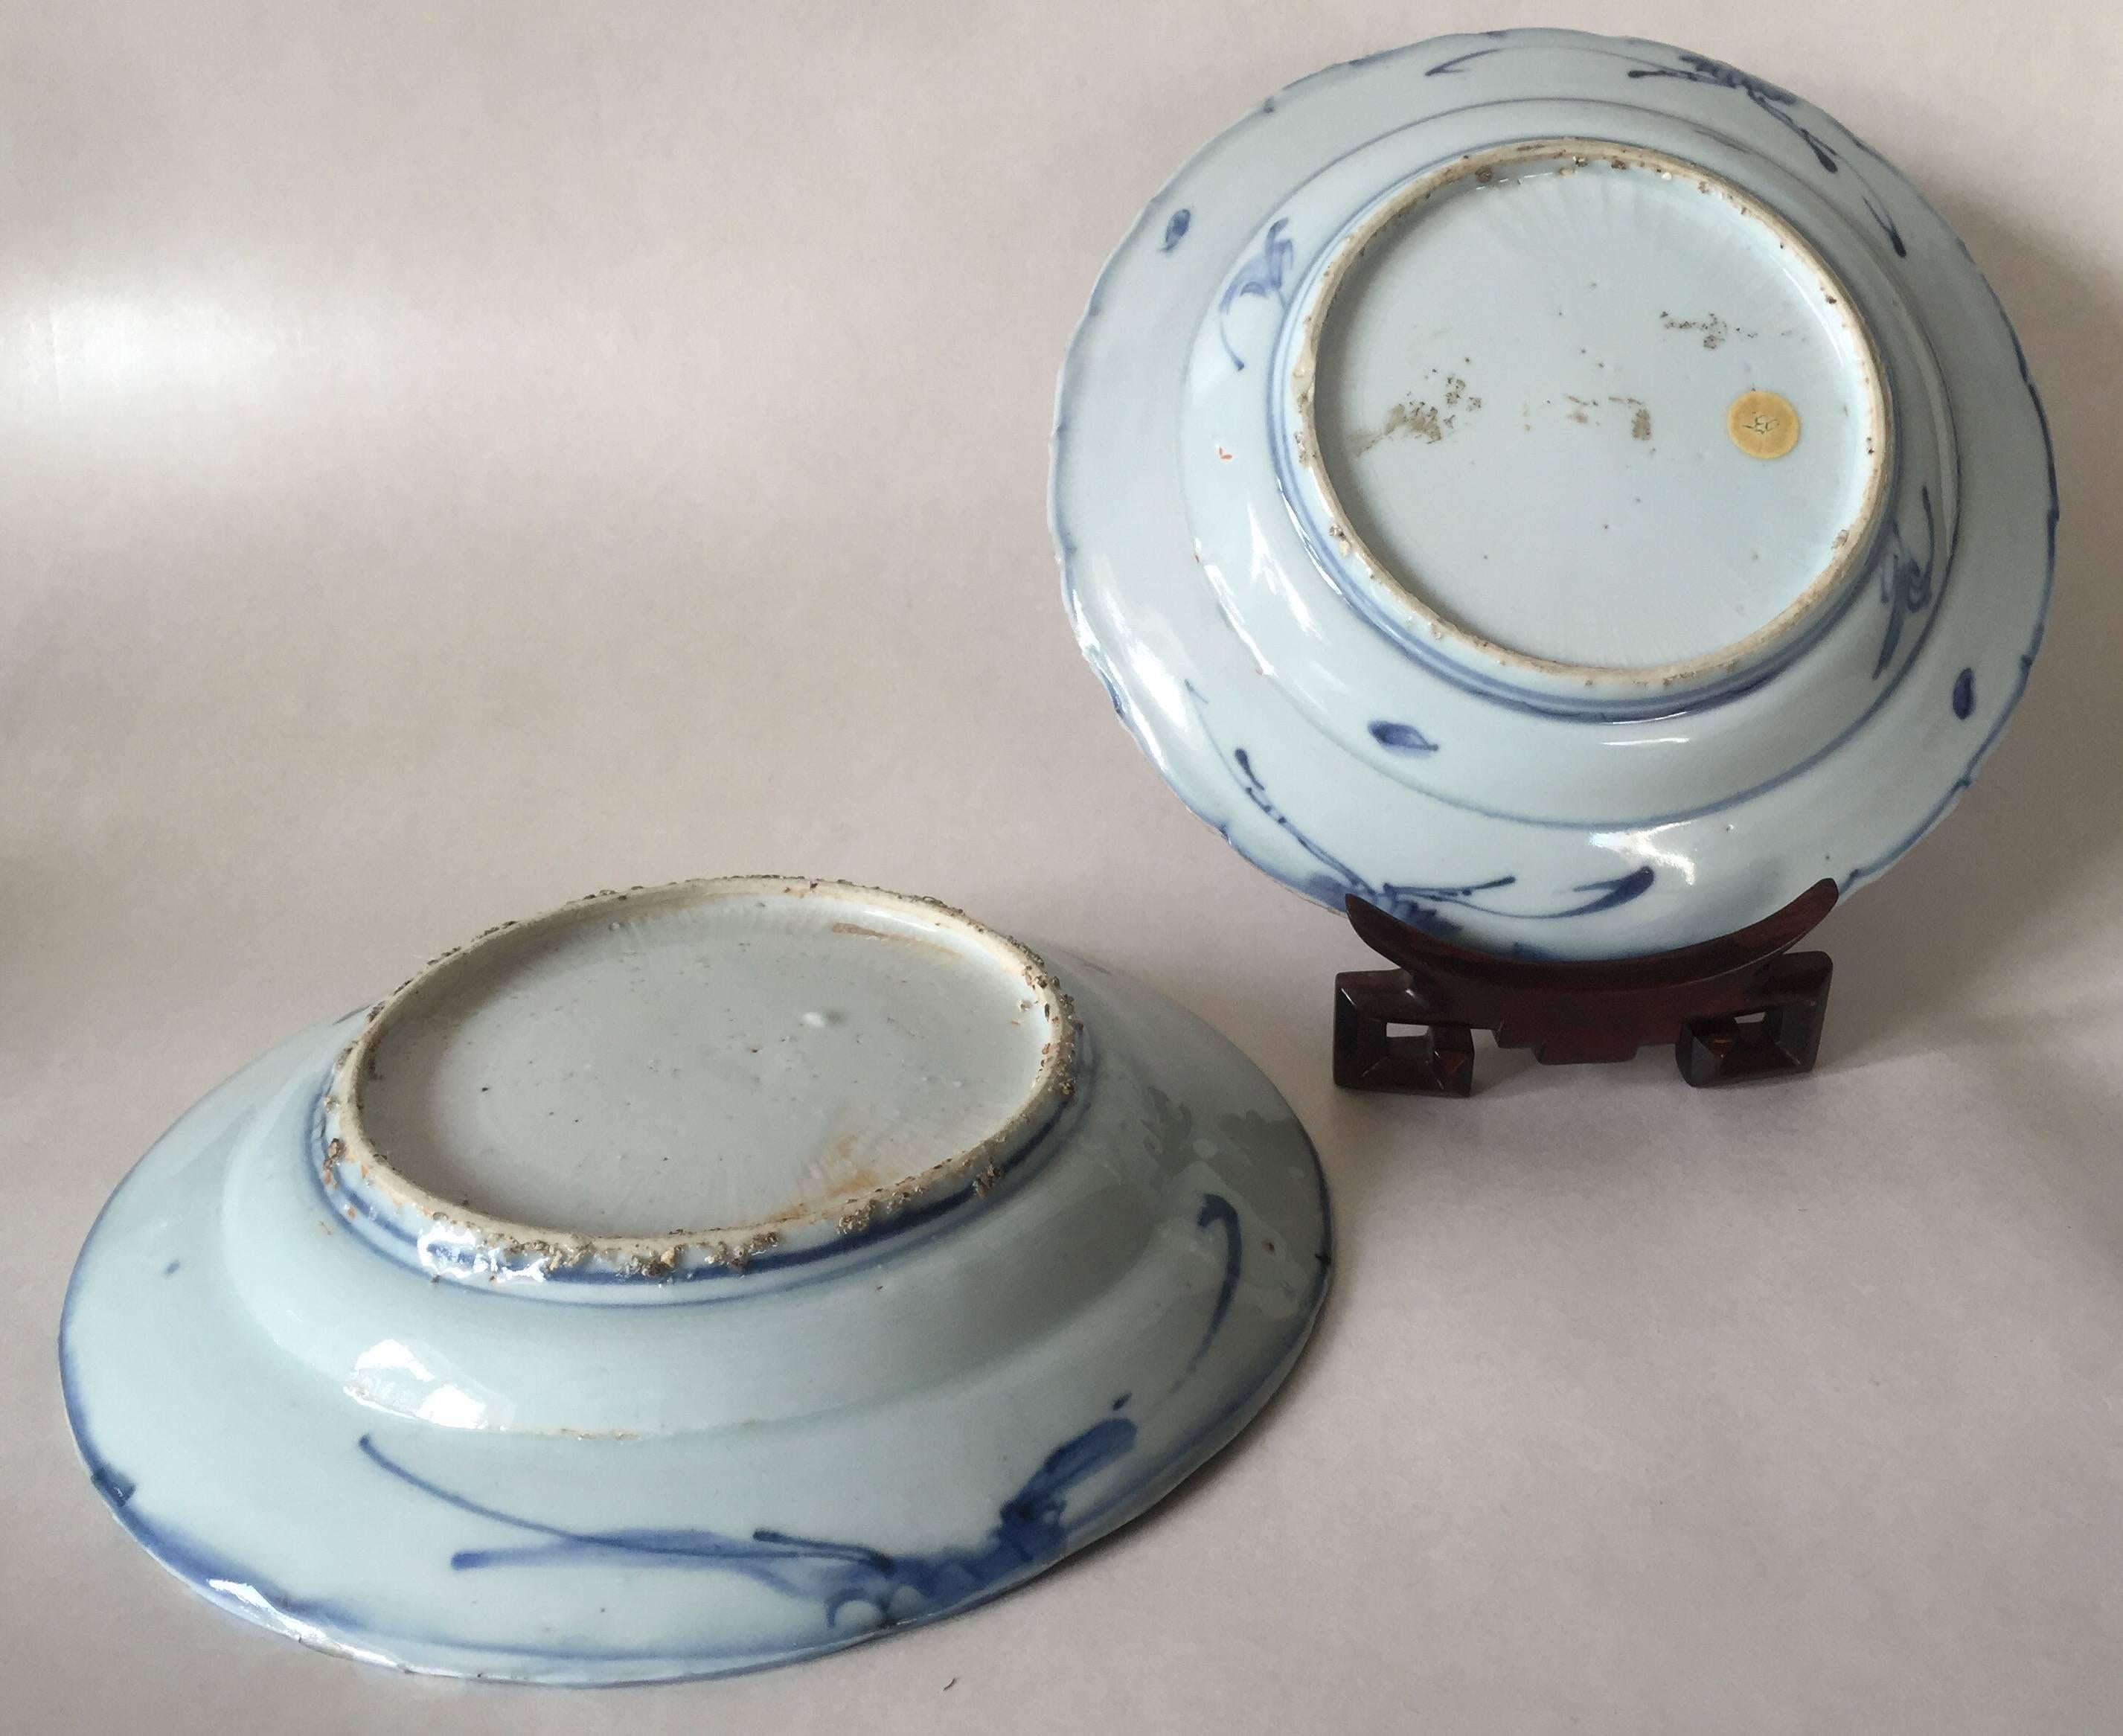 1579-1619 Wanli Chinese Ming Kraakdishes
A nice pair of Wanli period 1573-1619, blue and white dishes depicting a pair of deer and flowers. These dishes are in a fantastic condition, without any cracks, chips or restorations, only some minor